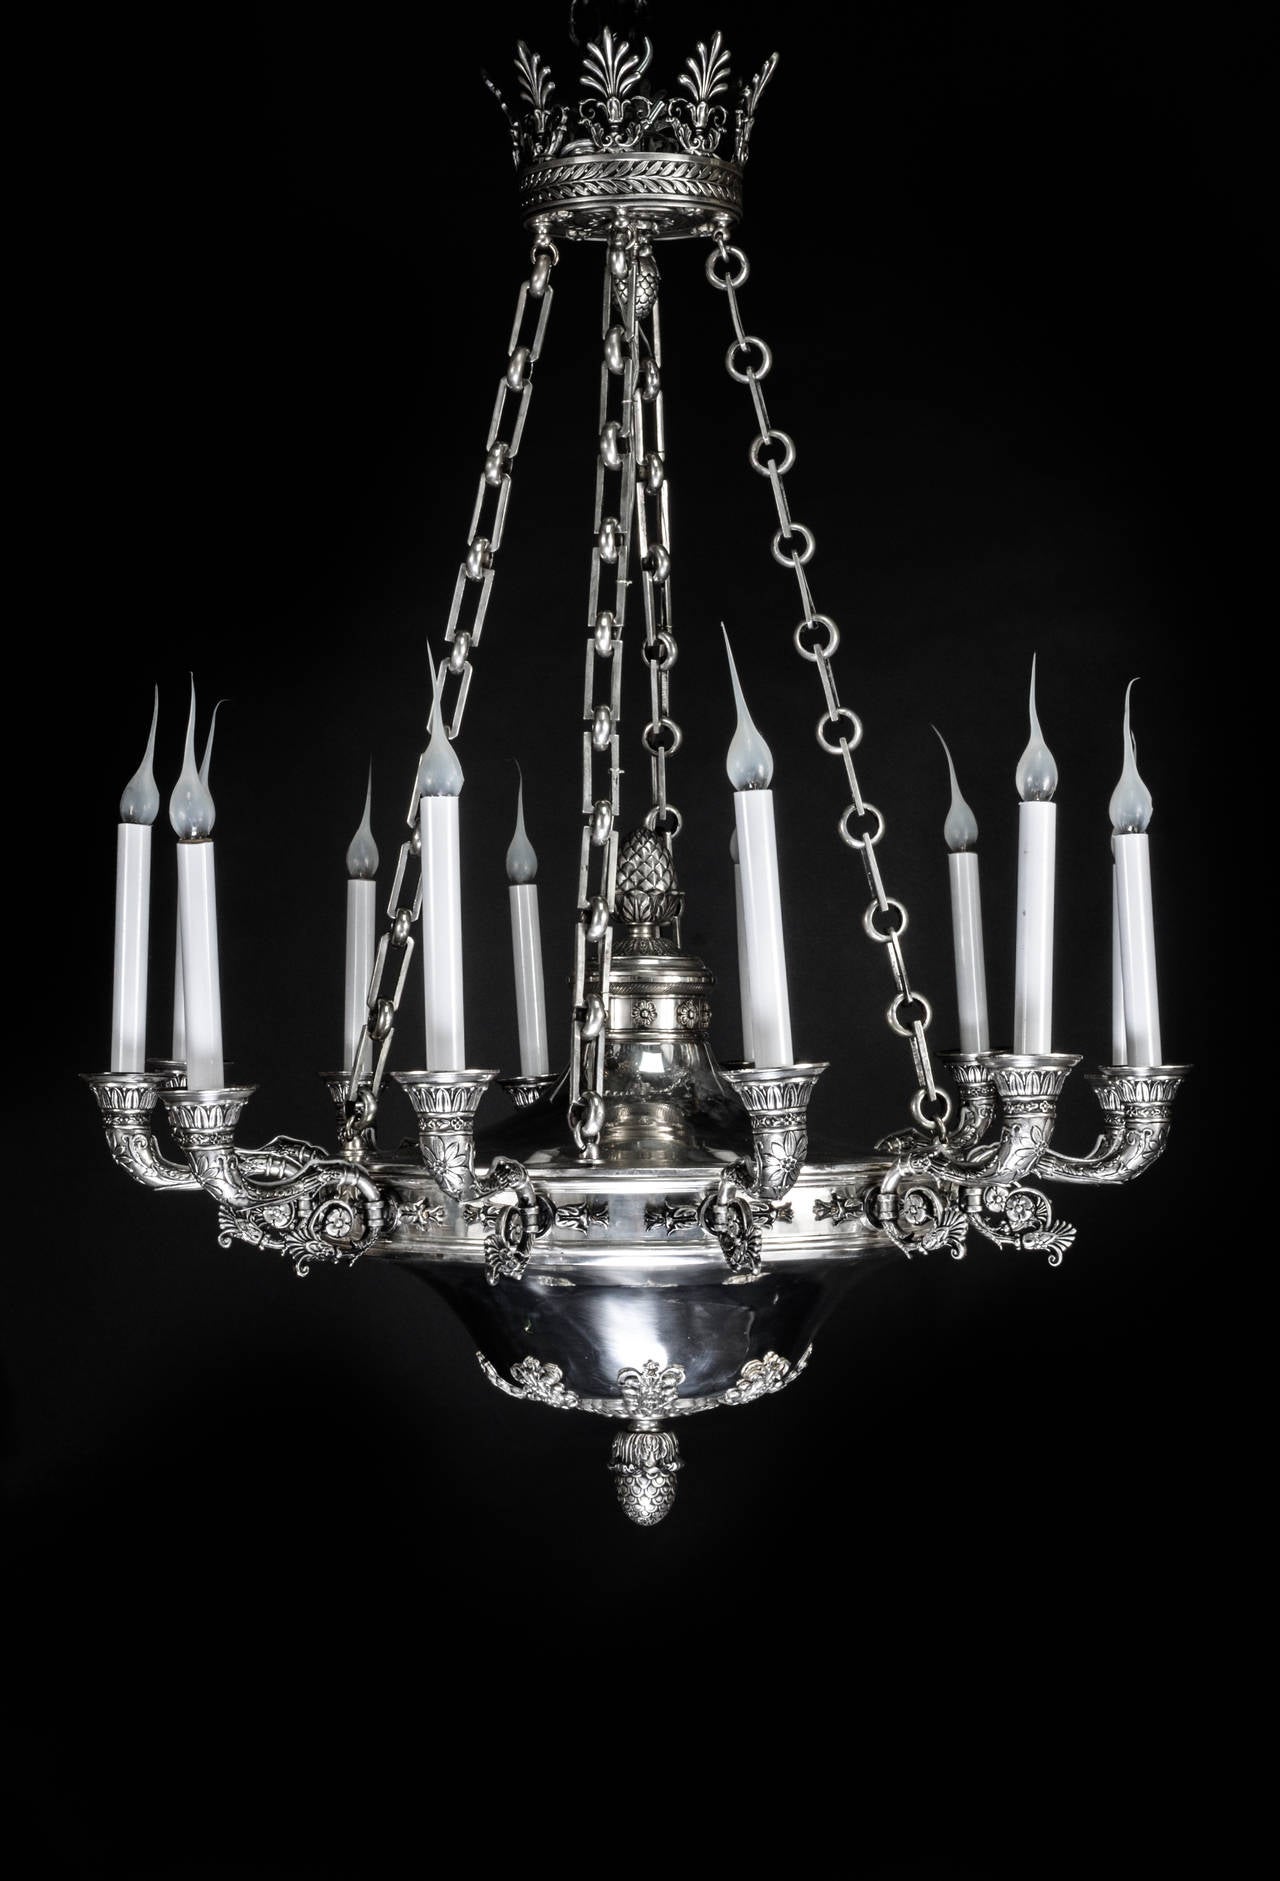 A large antique French Empire style silvered bronze multi light chandelier embellished with neoclassical motifs.